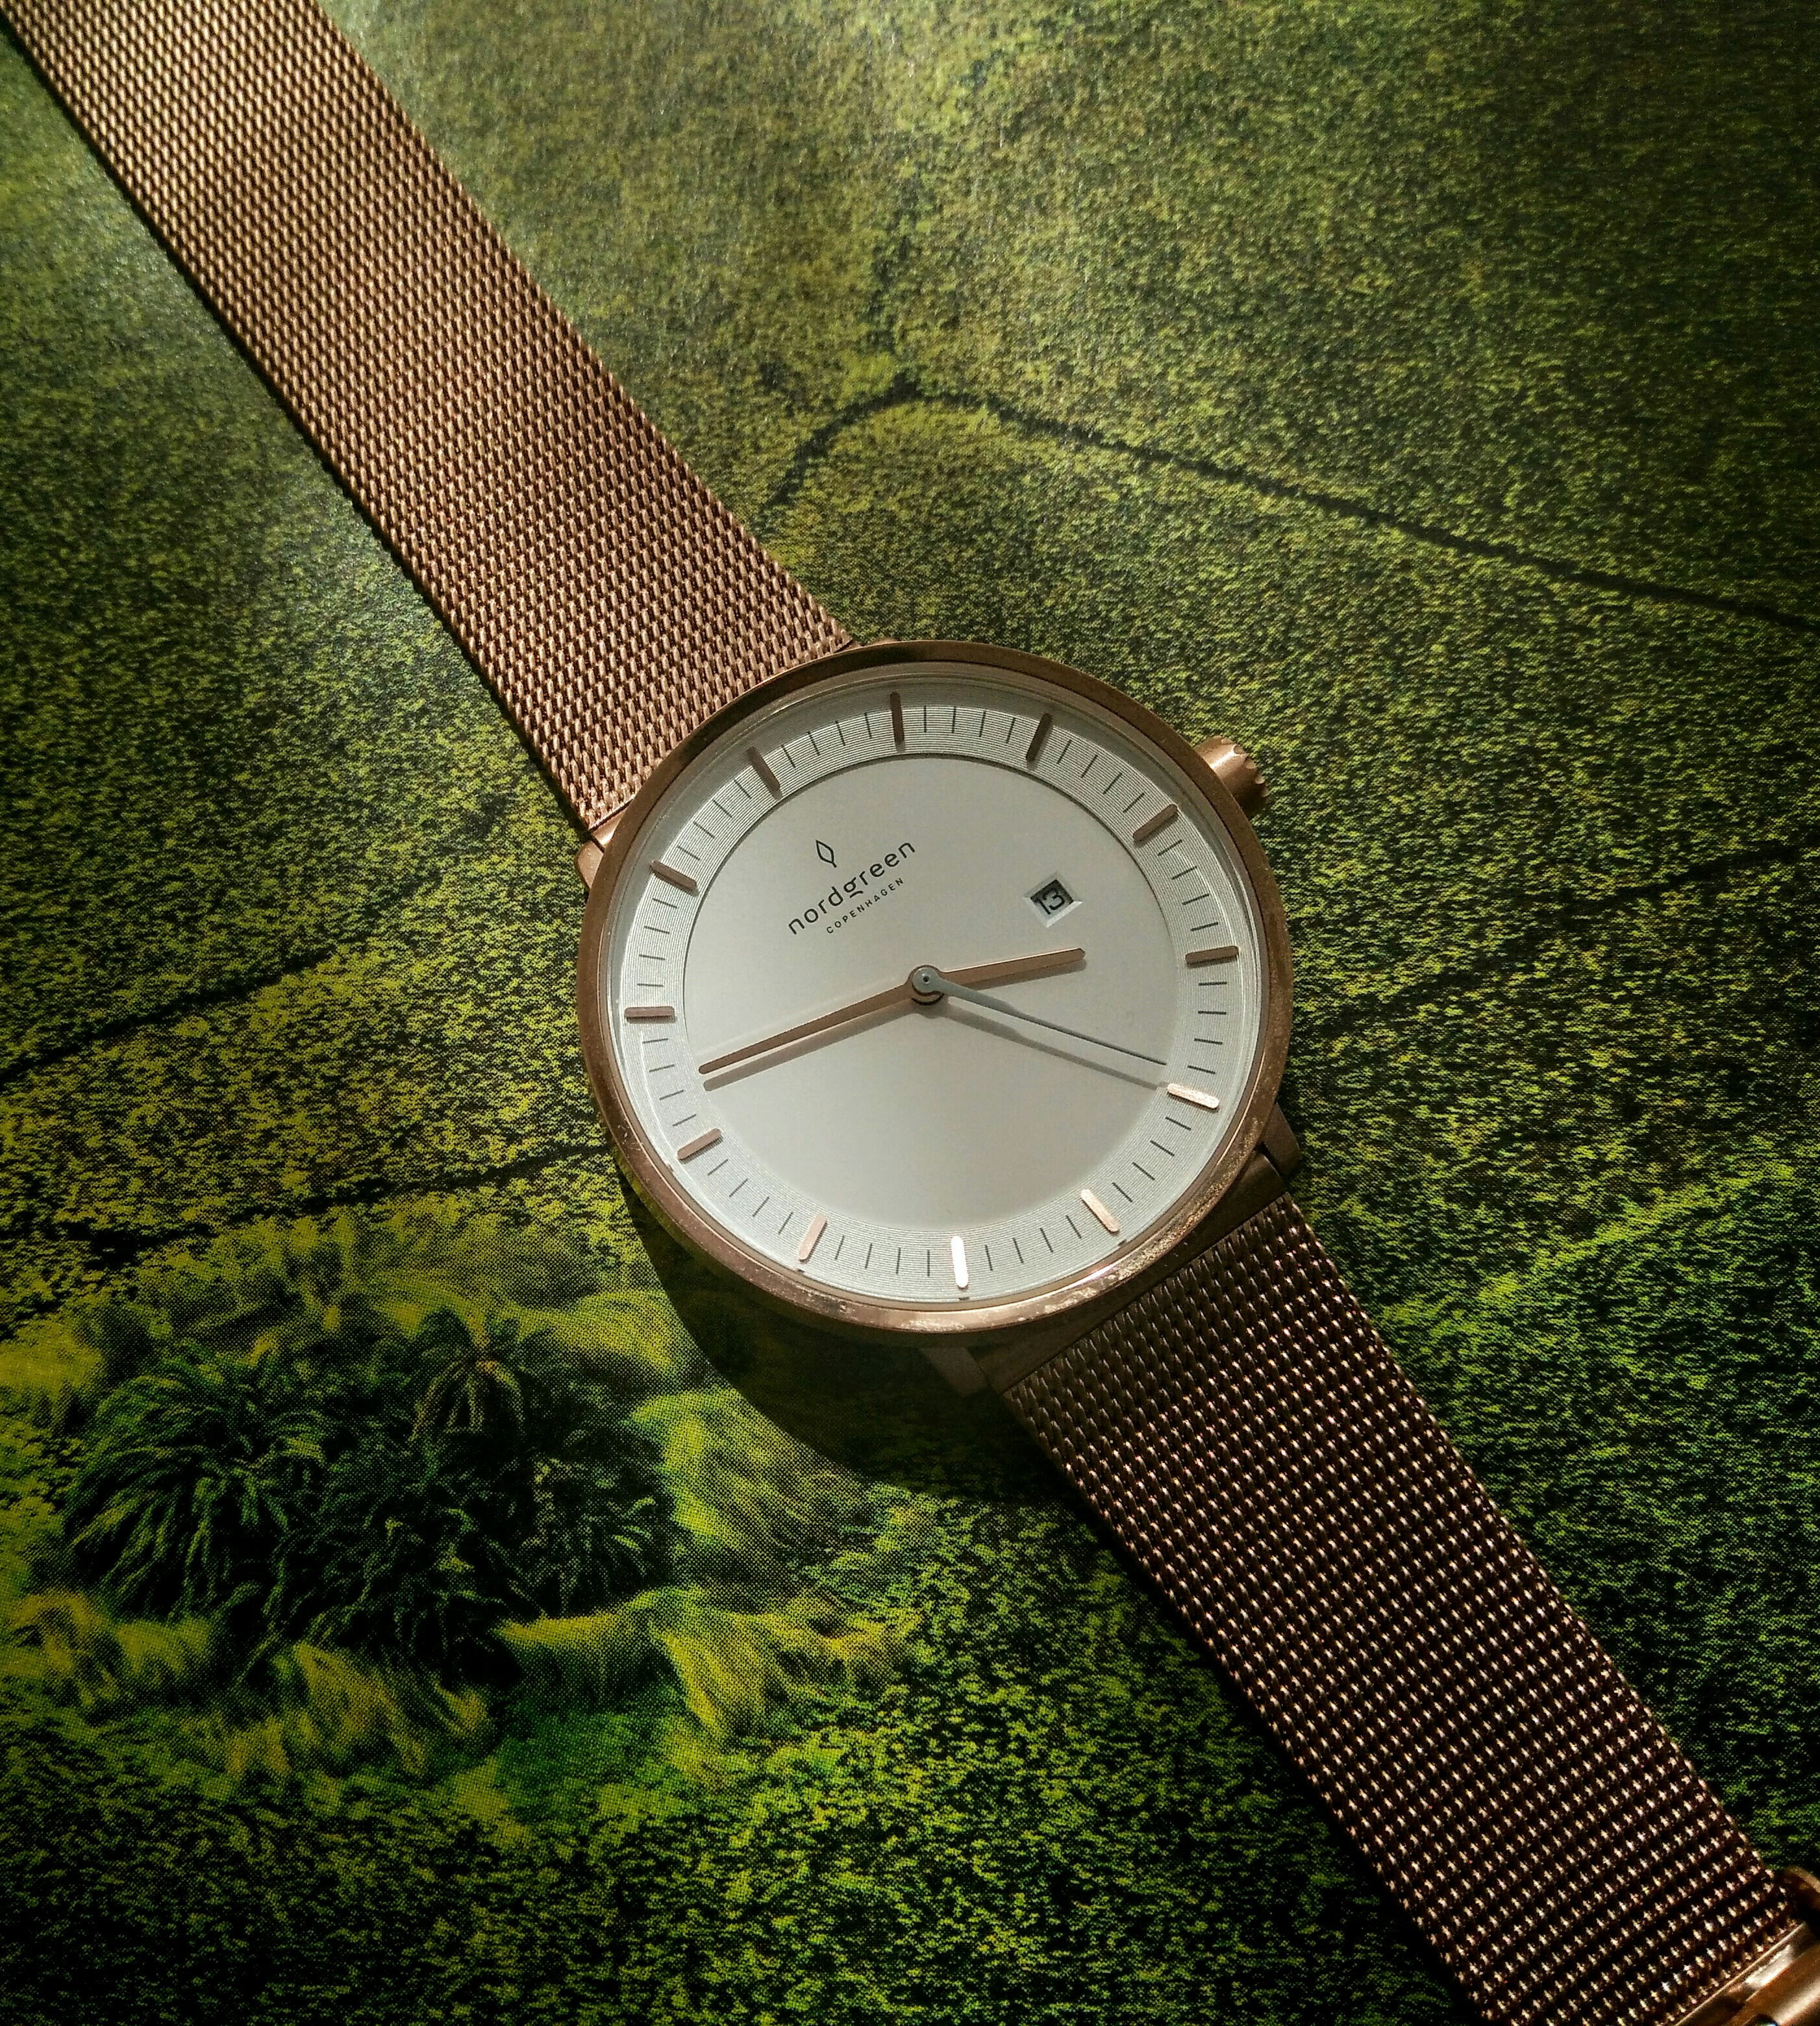 Nordgreen watches. Nordgreen Watches review. Nordgreen watches men. Nordgreen Watches women